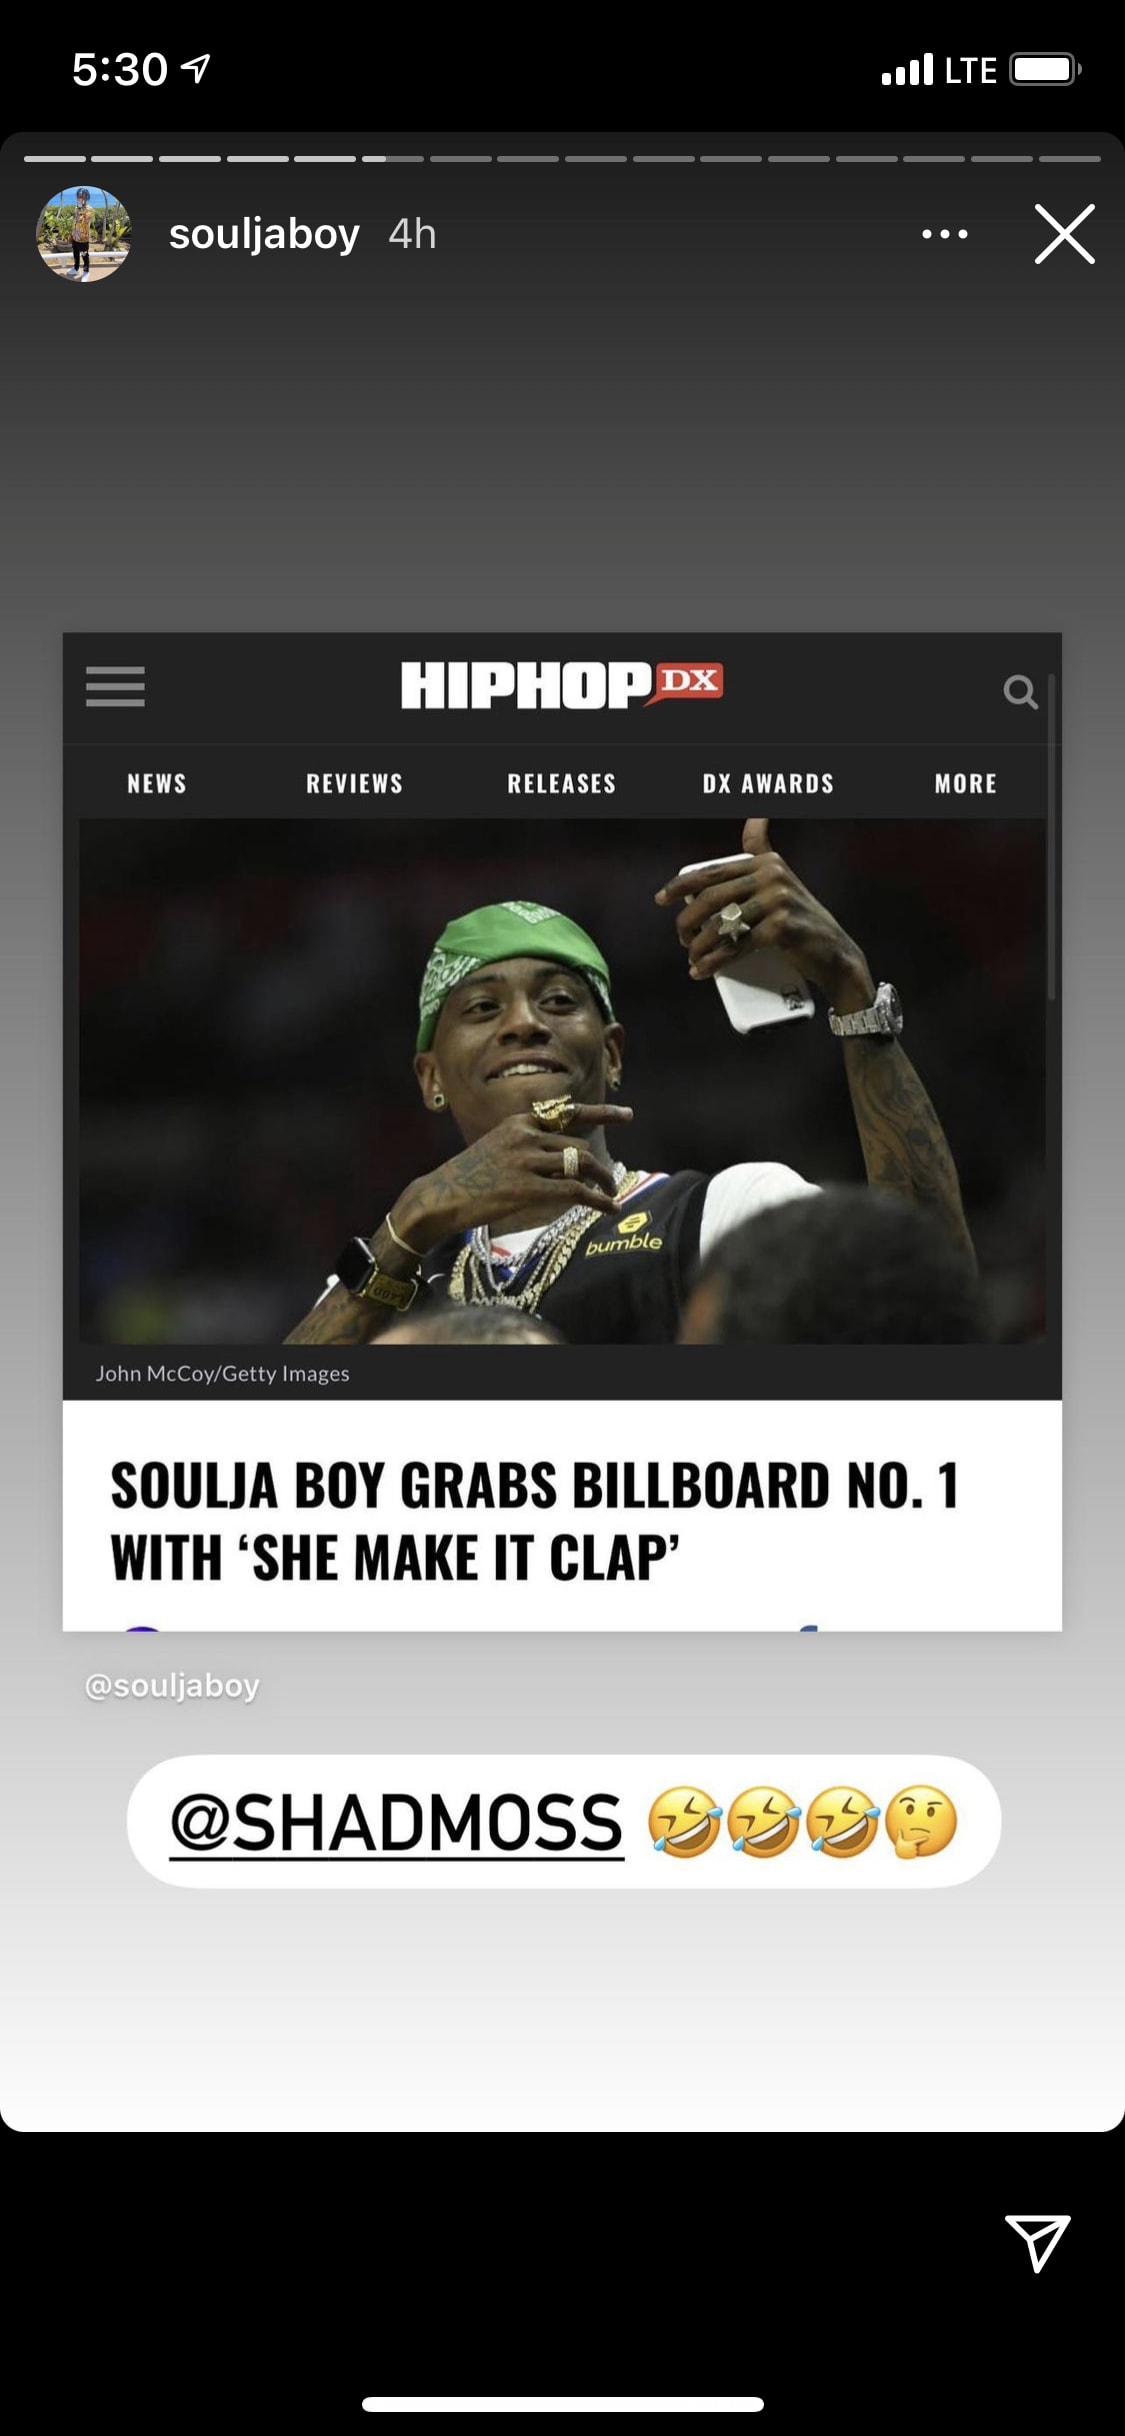 This is a photo of Soulja Boy.